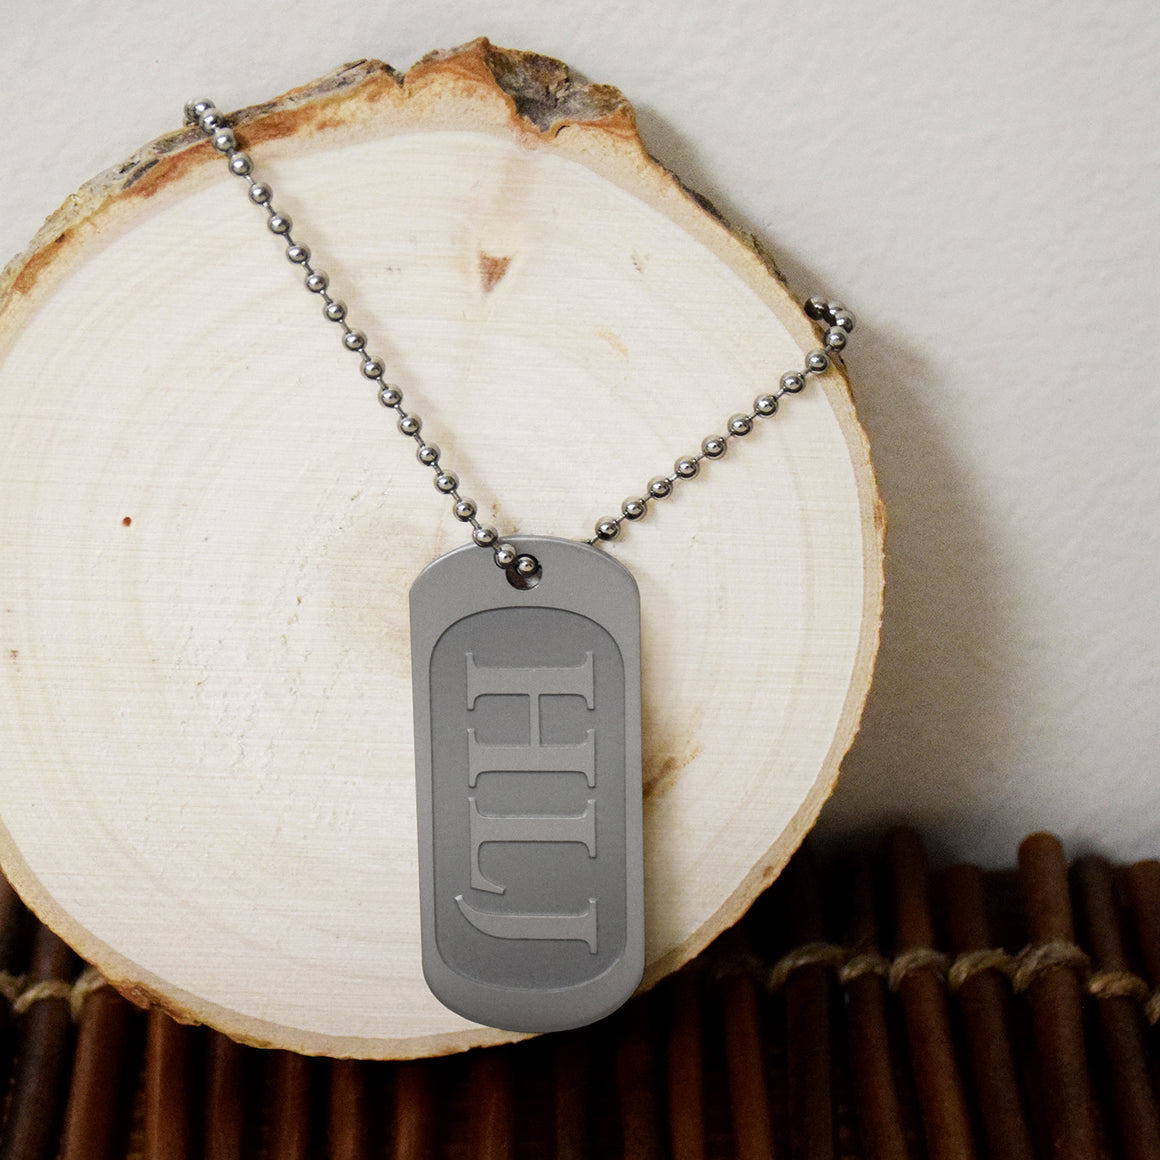 HLJ or Choose The Right in Spanish - Regular Size Dog Tag